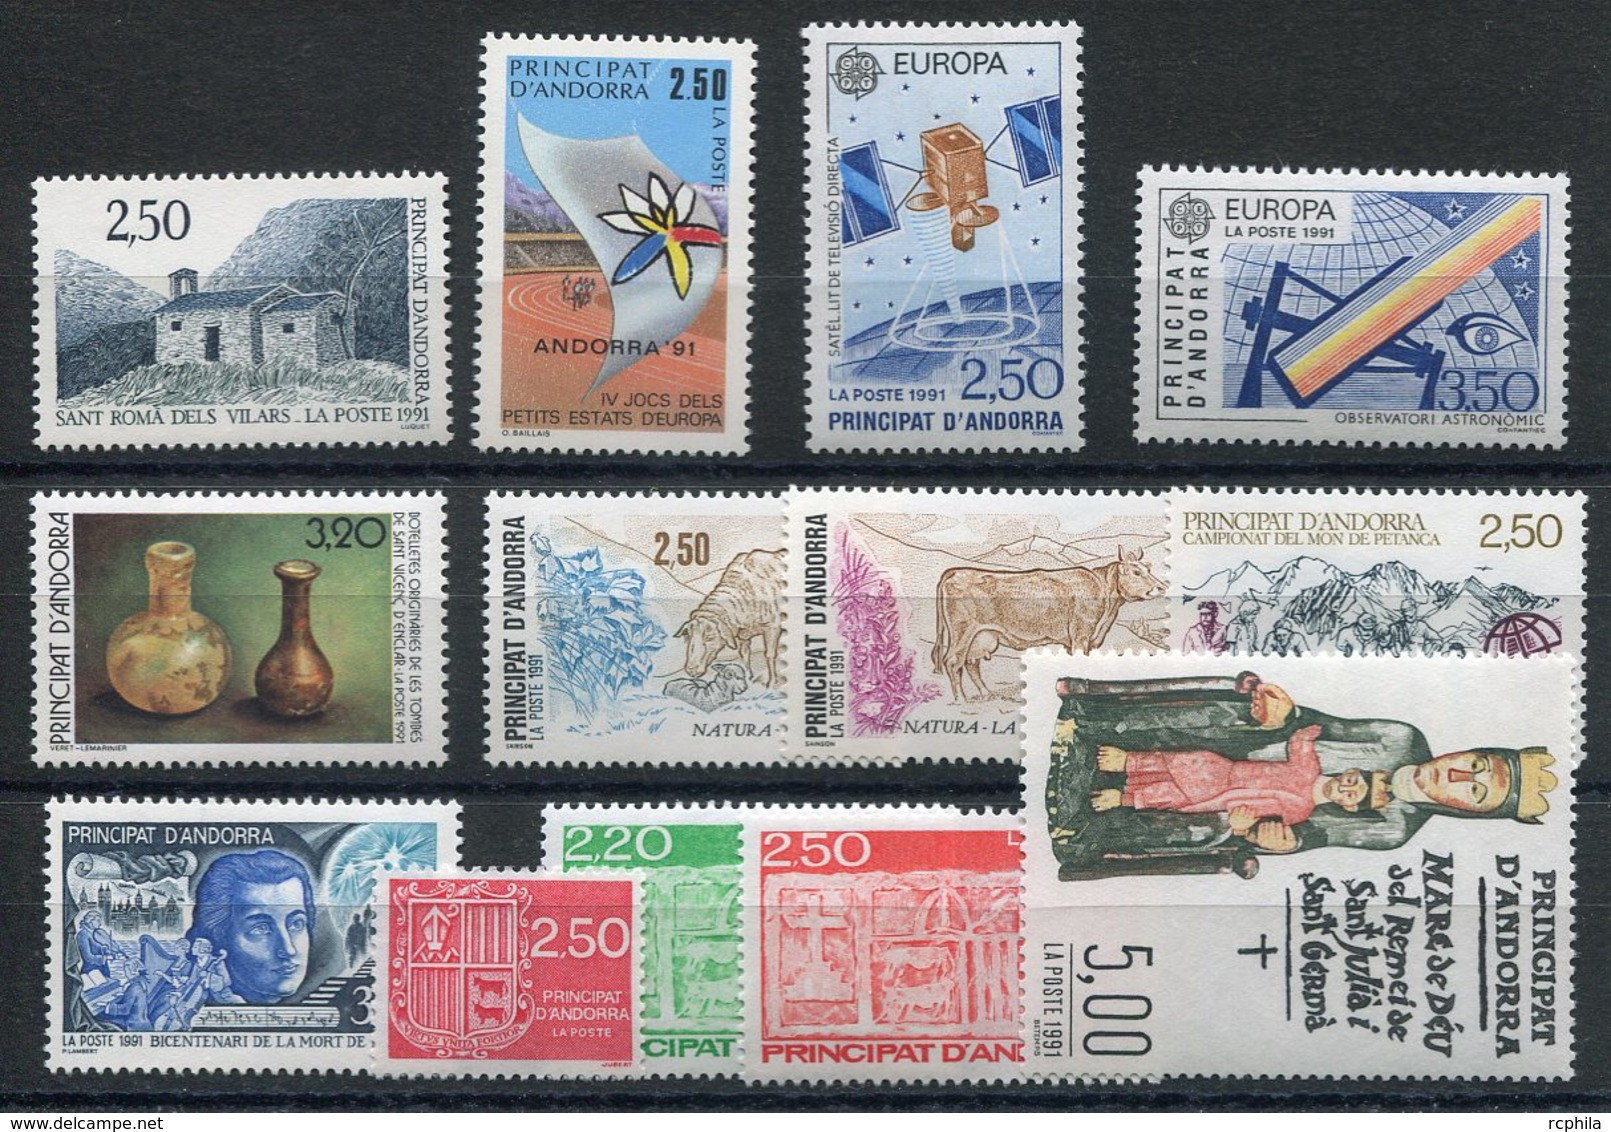 RC 19322 ANDORRE COTE 45,40€ - 1991 ANNÉE COMPLETE SOIT 13 TIMBRES N° 400 / 412 NEUF ** MNH TB - Annate Complete